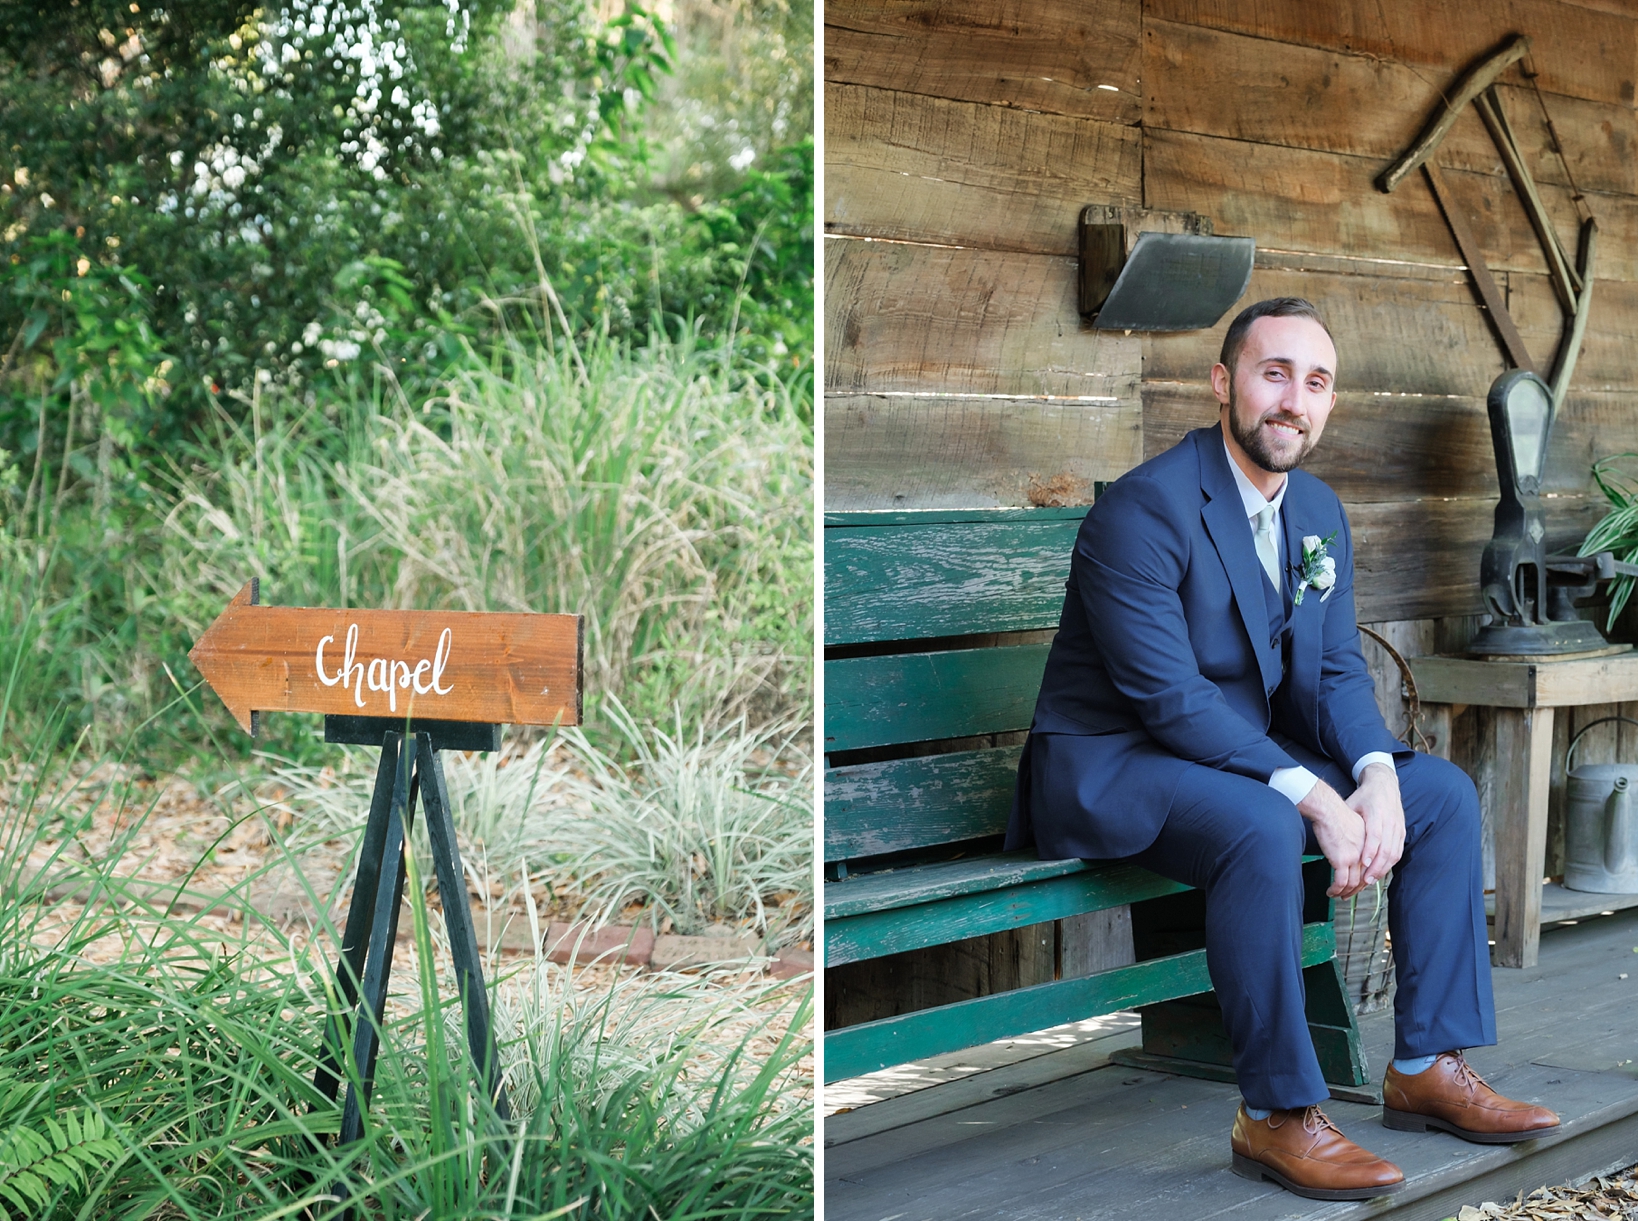 Solo portrait of the Groom sitting on a bench and a sign pointing guests to the chapel